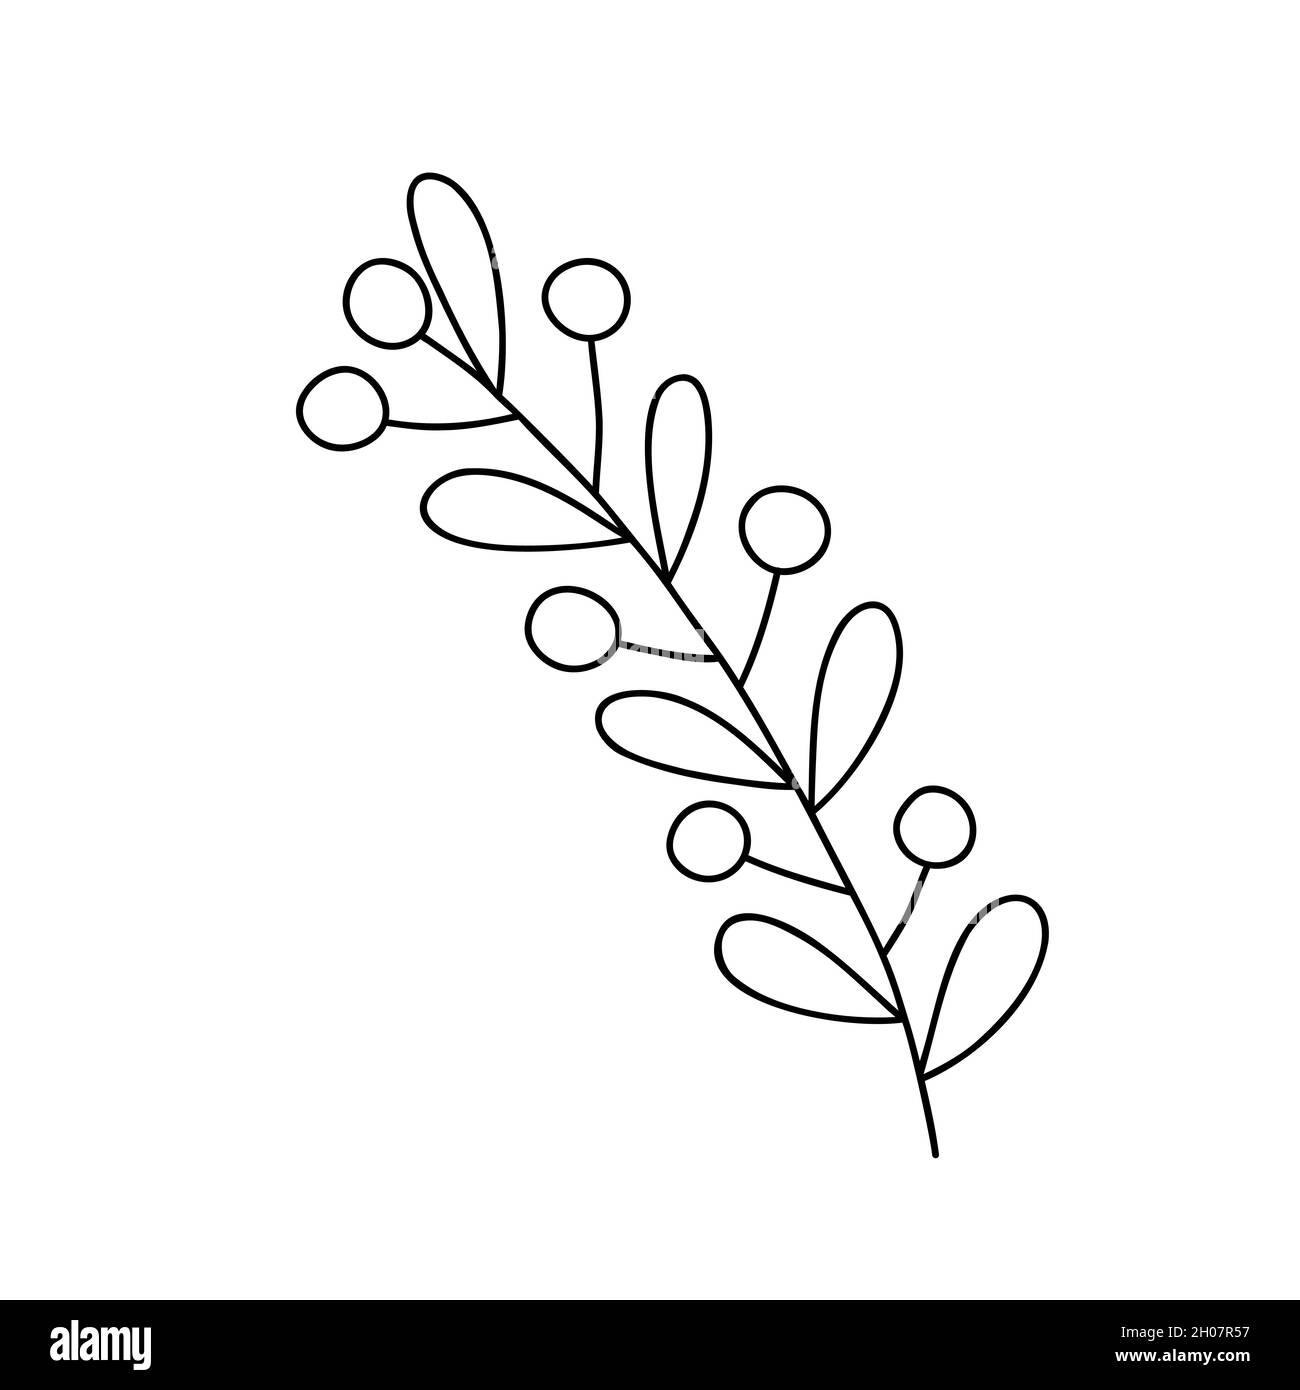 Christmas plant decorative branch with leaves, berries for home decor, festive holiday arrangement, vector illustration for seasonal greeting card, invitation, banner Stock Vector